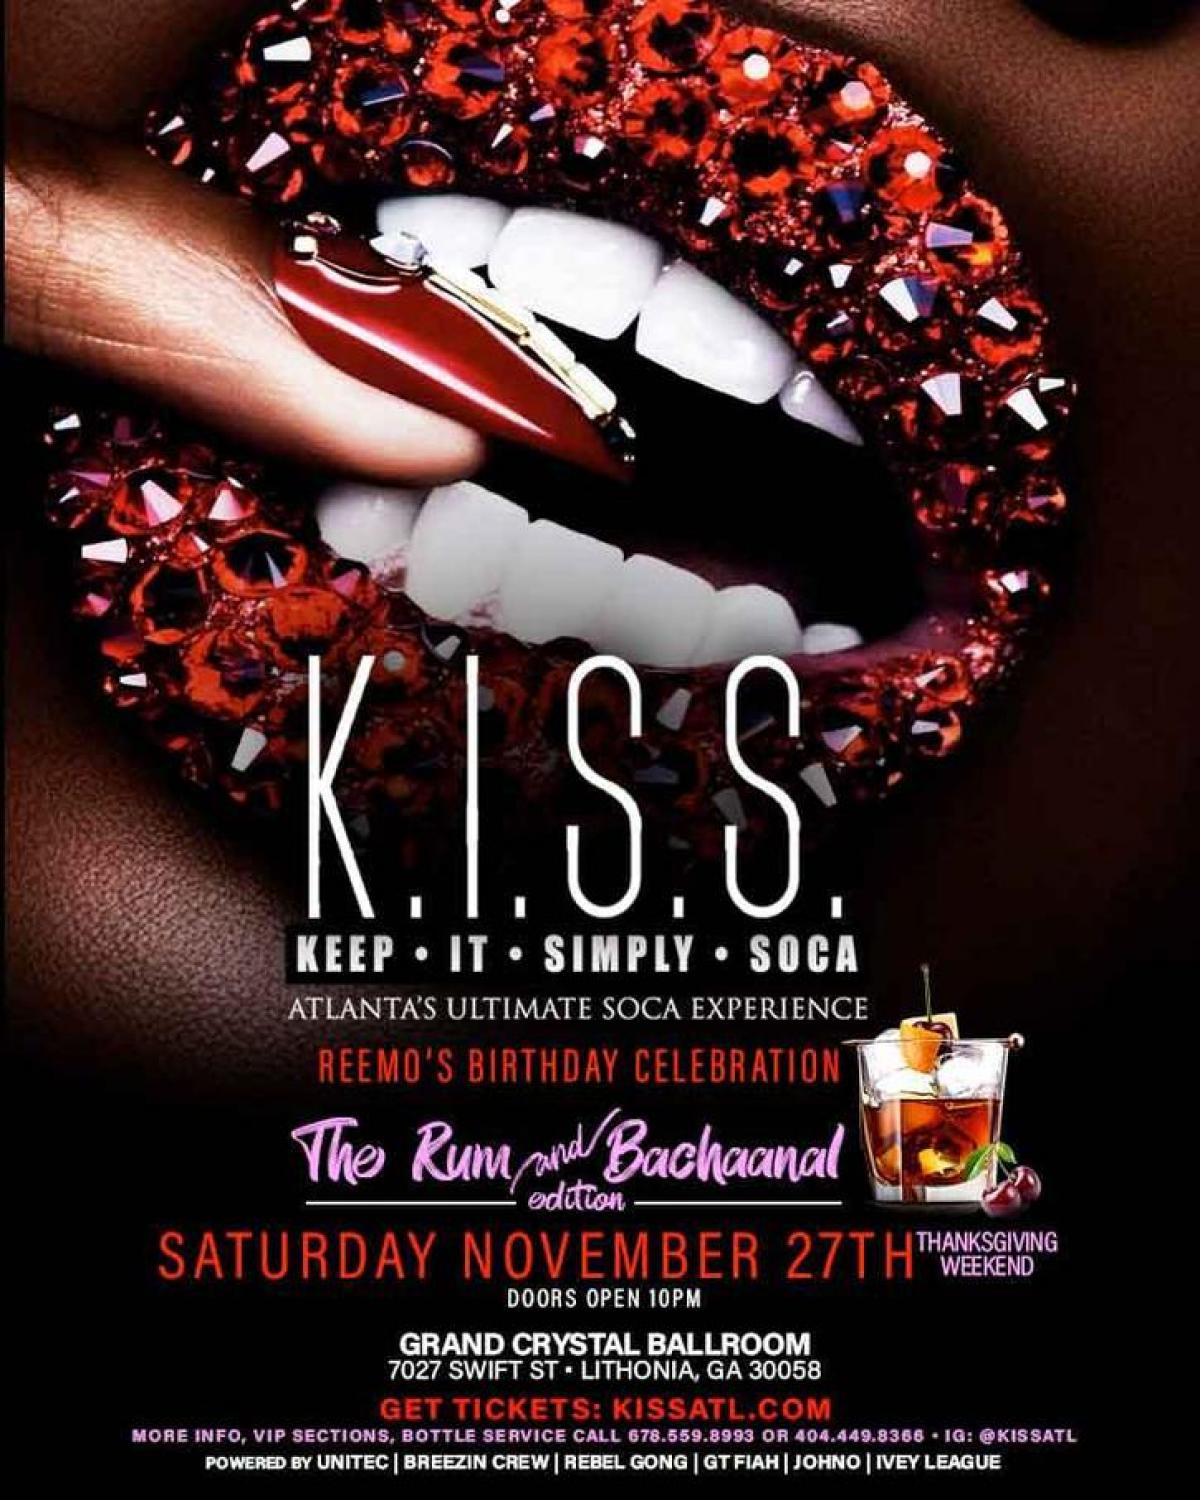 K.I.S.S. flyer or graphic.